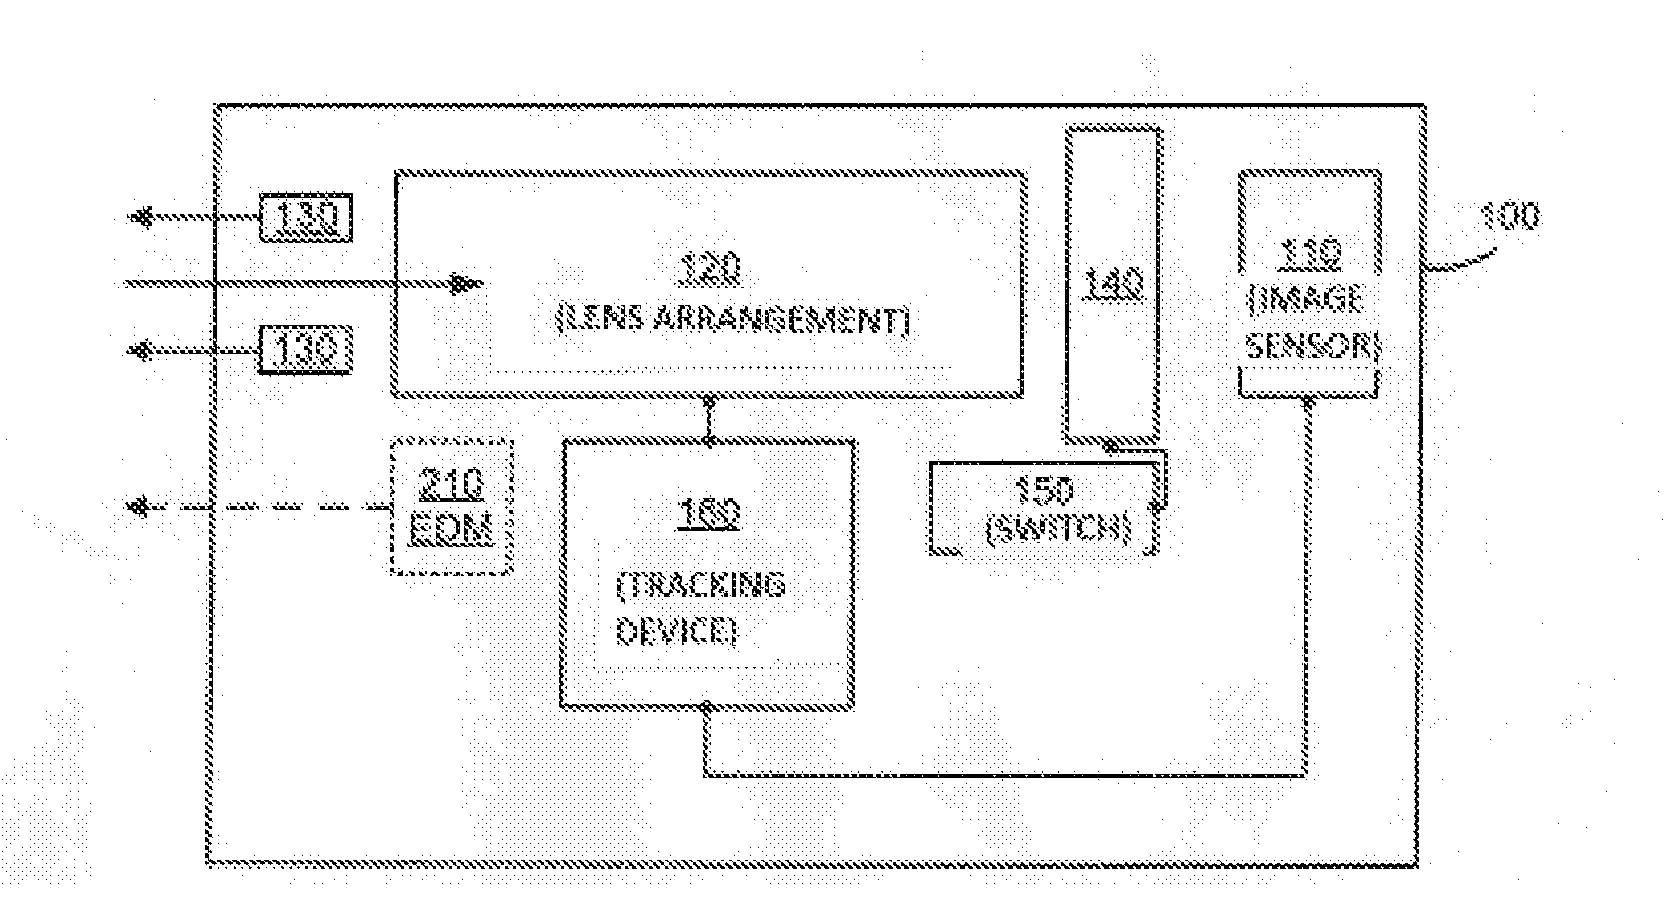 Optical system for tracking a target